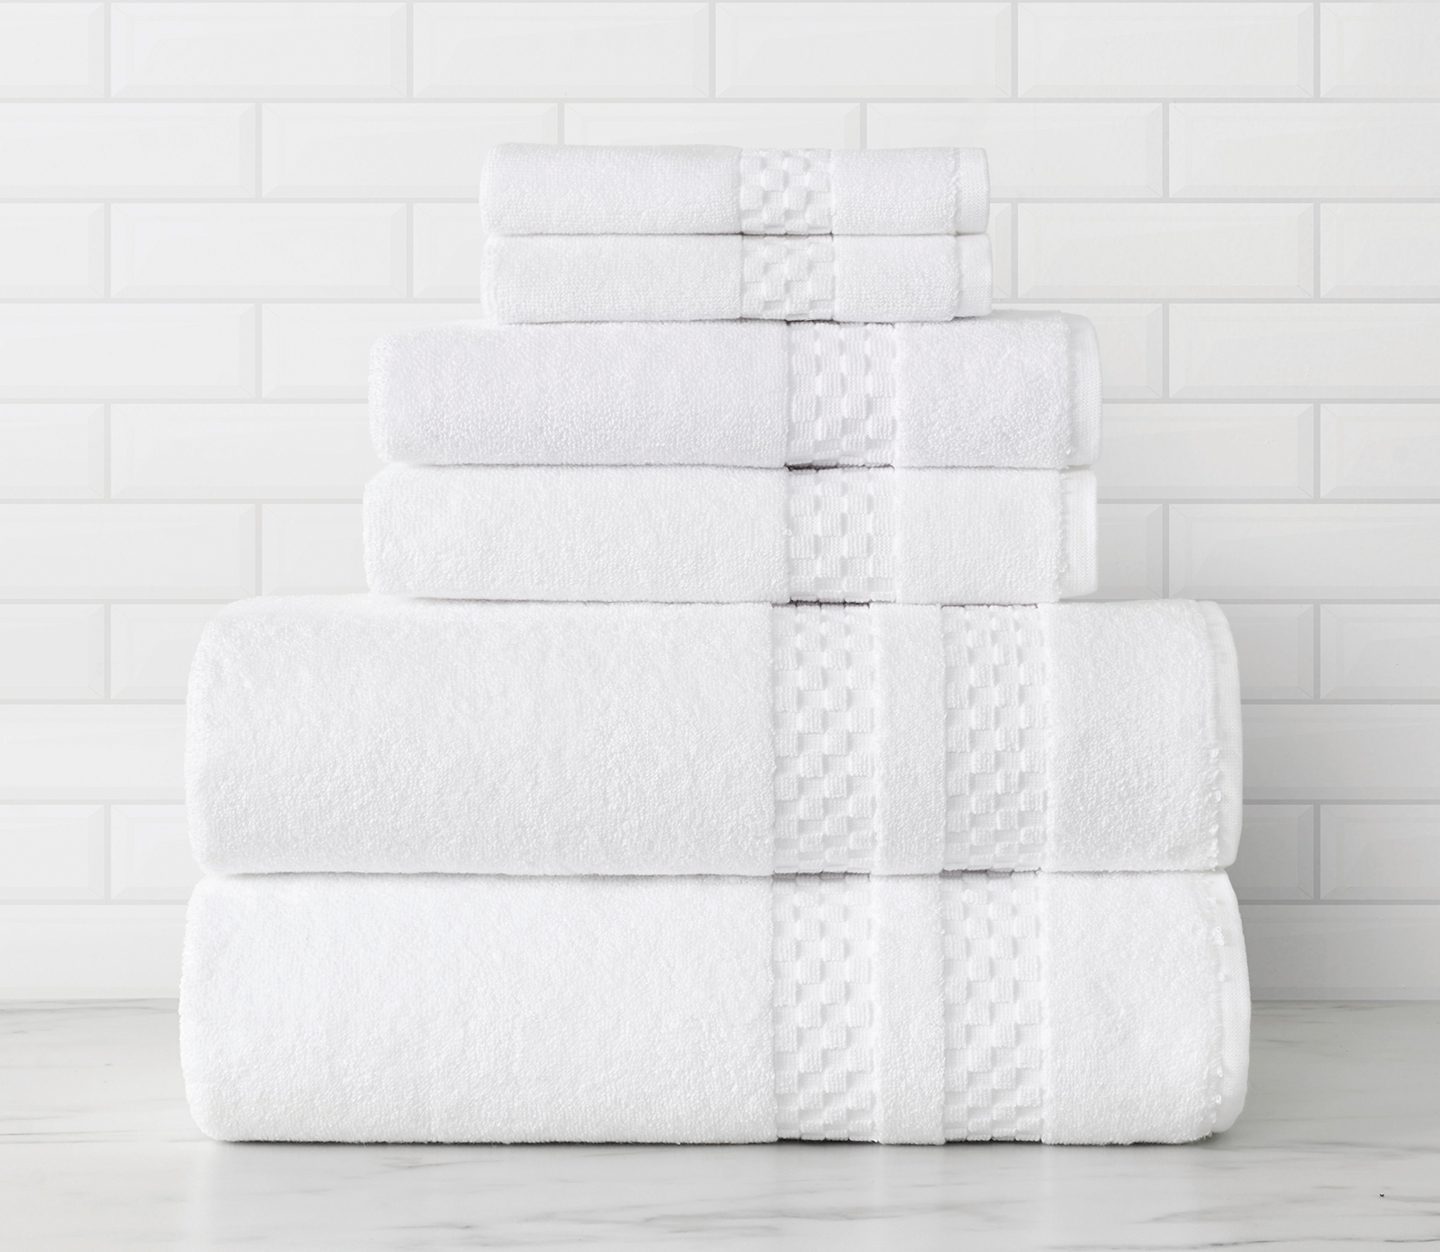 Tips For Choosing The Best Hotel Towels